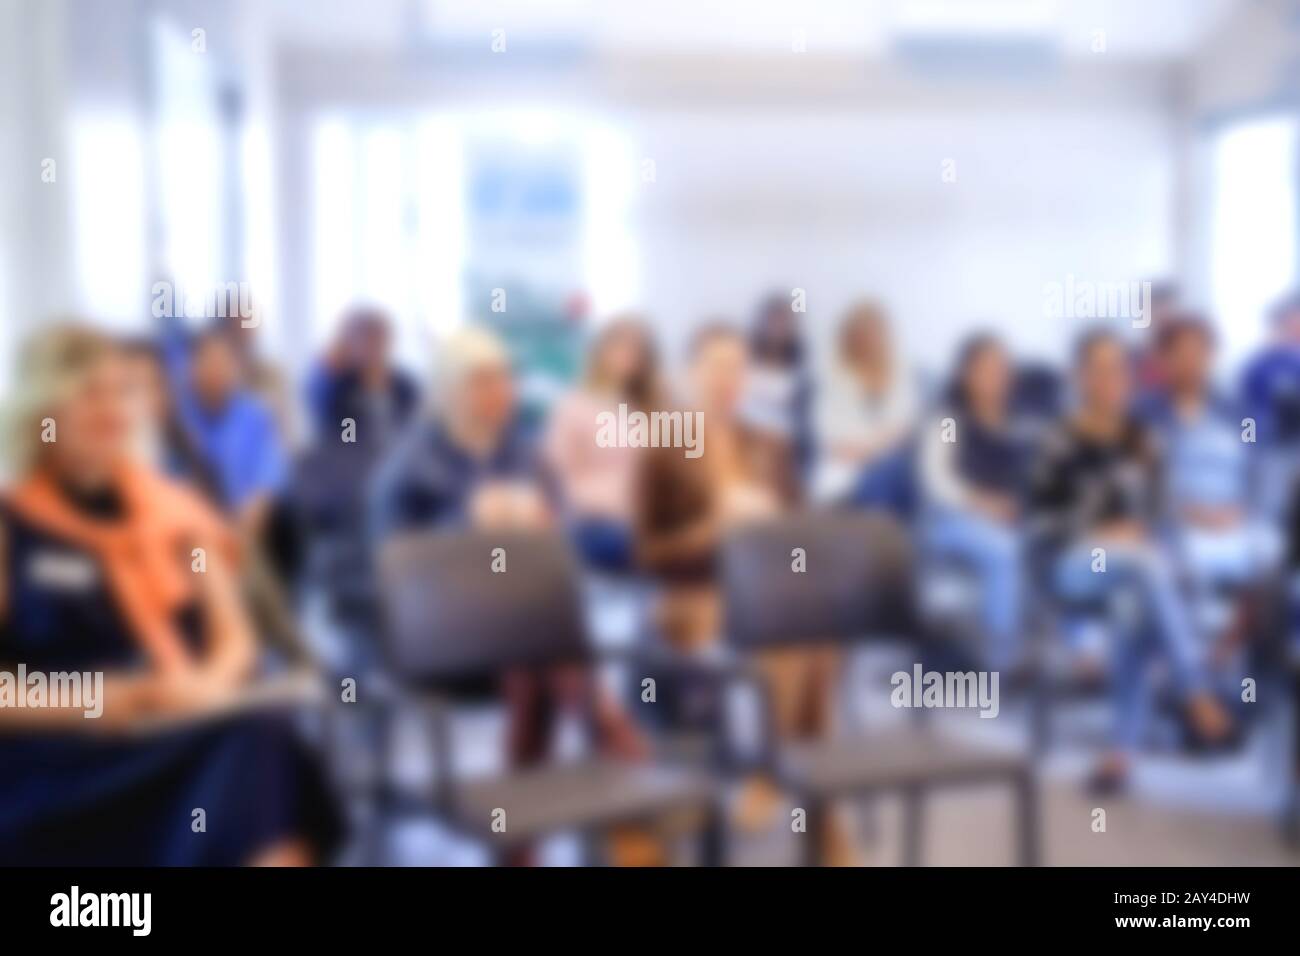 Blurred front view background classroom. High school or undergraduate  student sitting on lecture chairs listening to speaker. Education concept  Stock Photo - Alamy